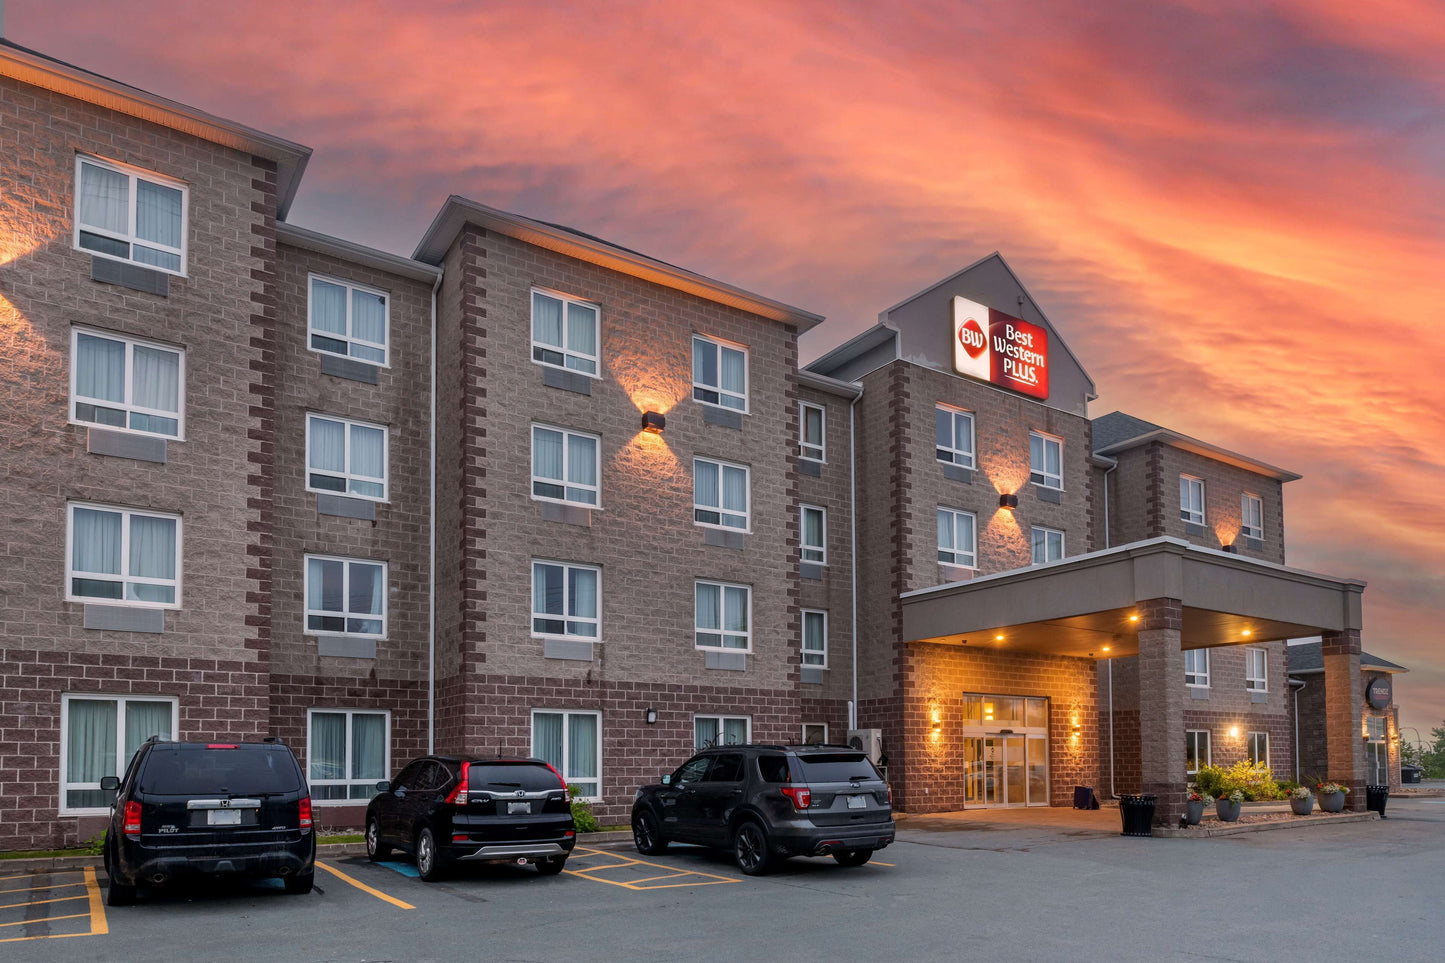 Hotel Review: Best Western Plus Dartmouth Hotel & Suites (Reviews, Pricing & Amenities)